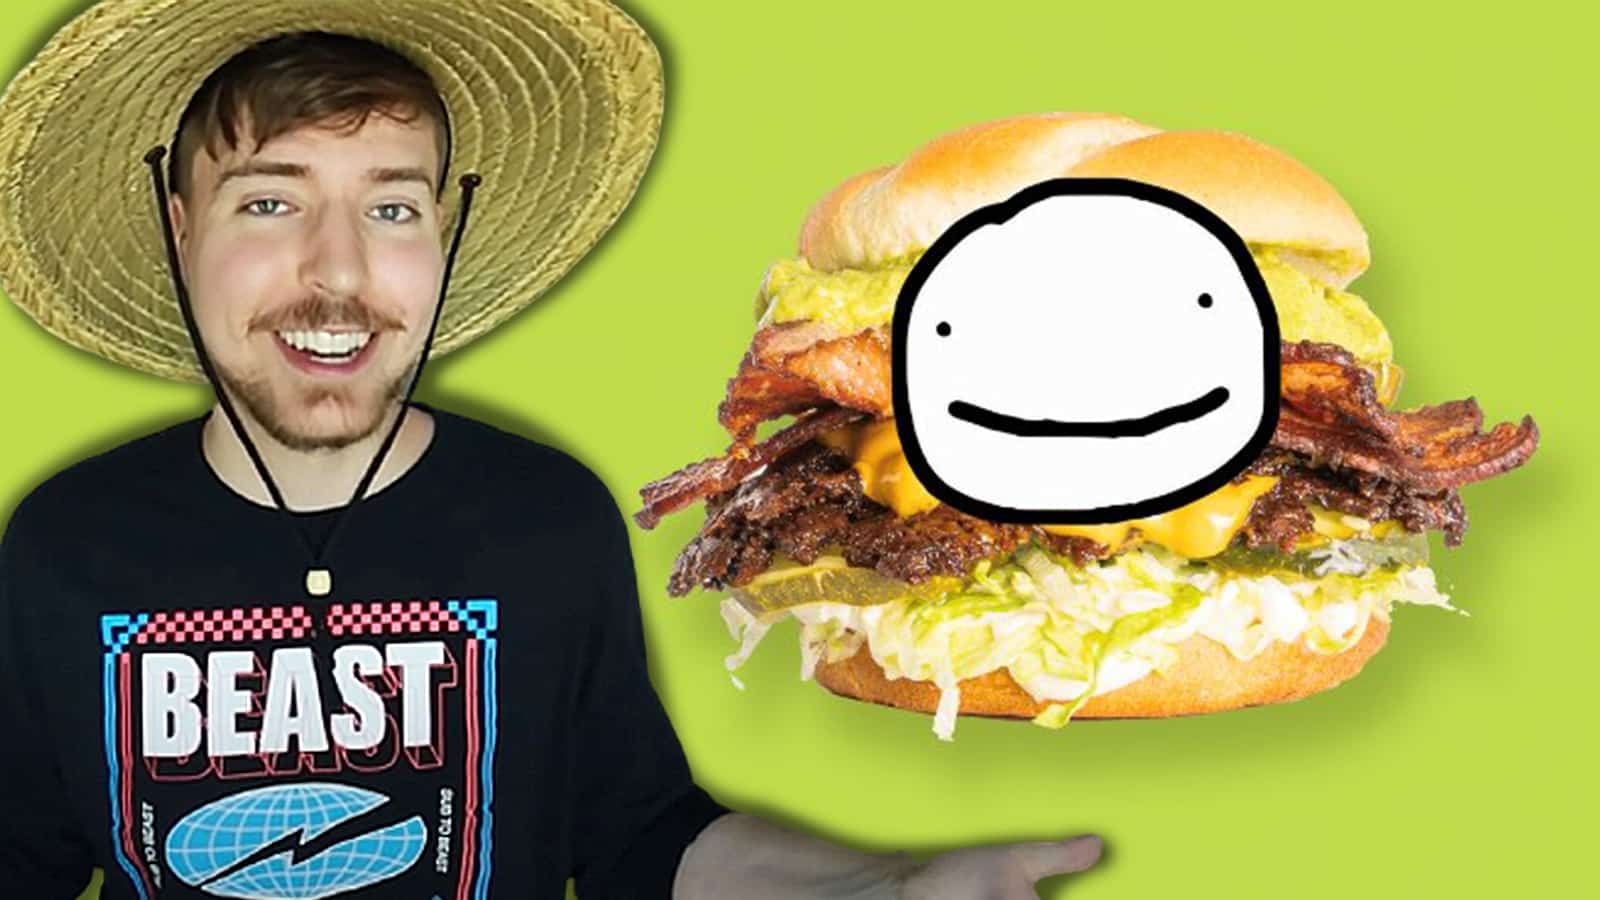 MrBeast Burger Locations — Where You Can Get The Mr. Beast Burger